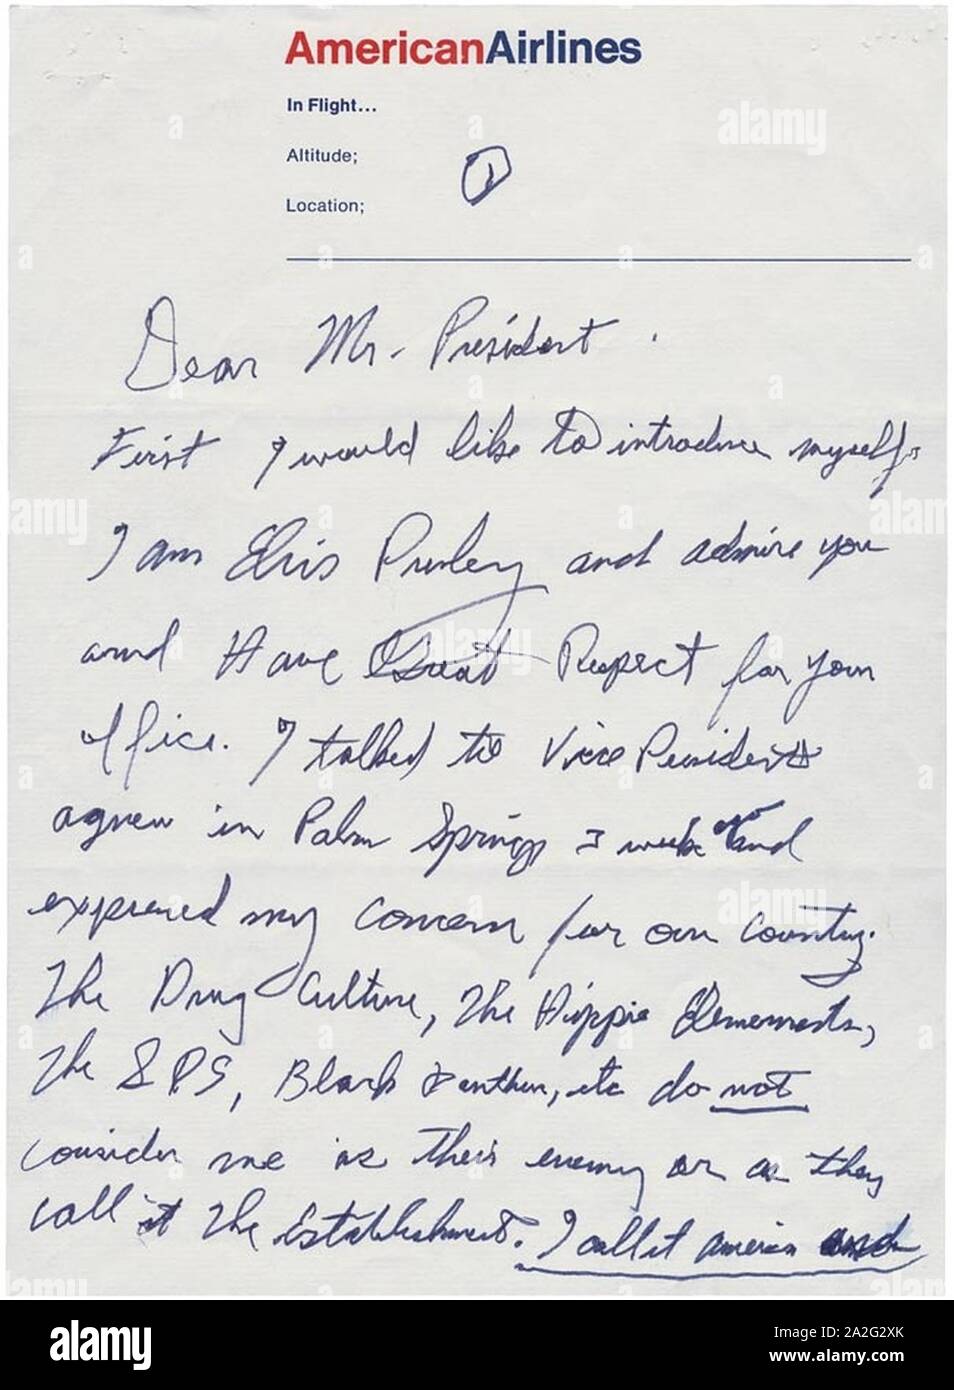 Elvis Letter to Nixon R-013 - Page 1 of 6. Stock Photo